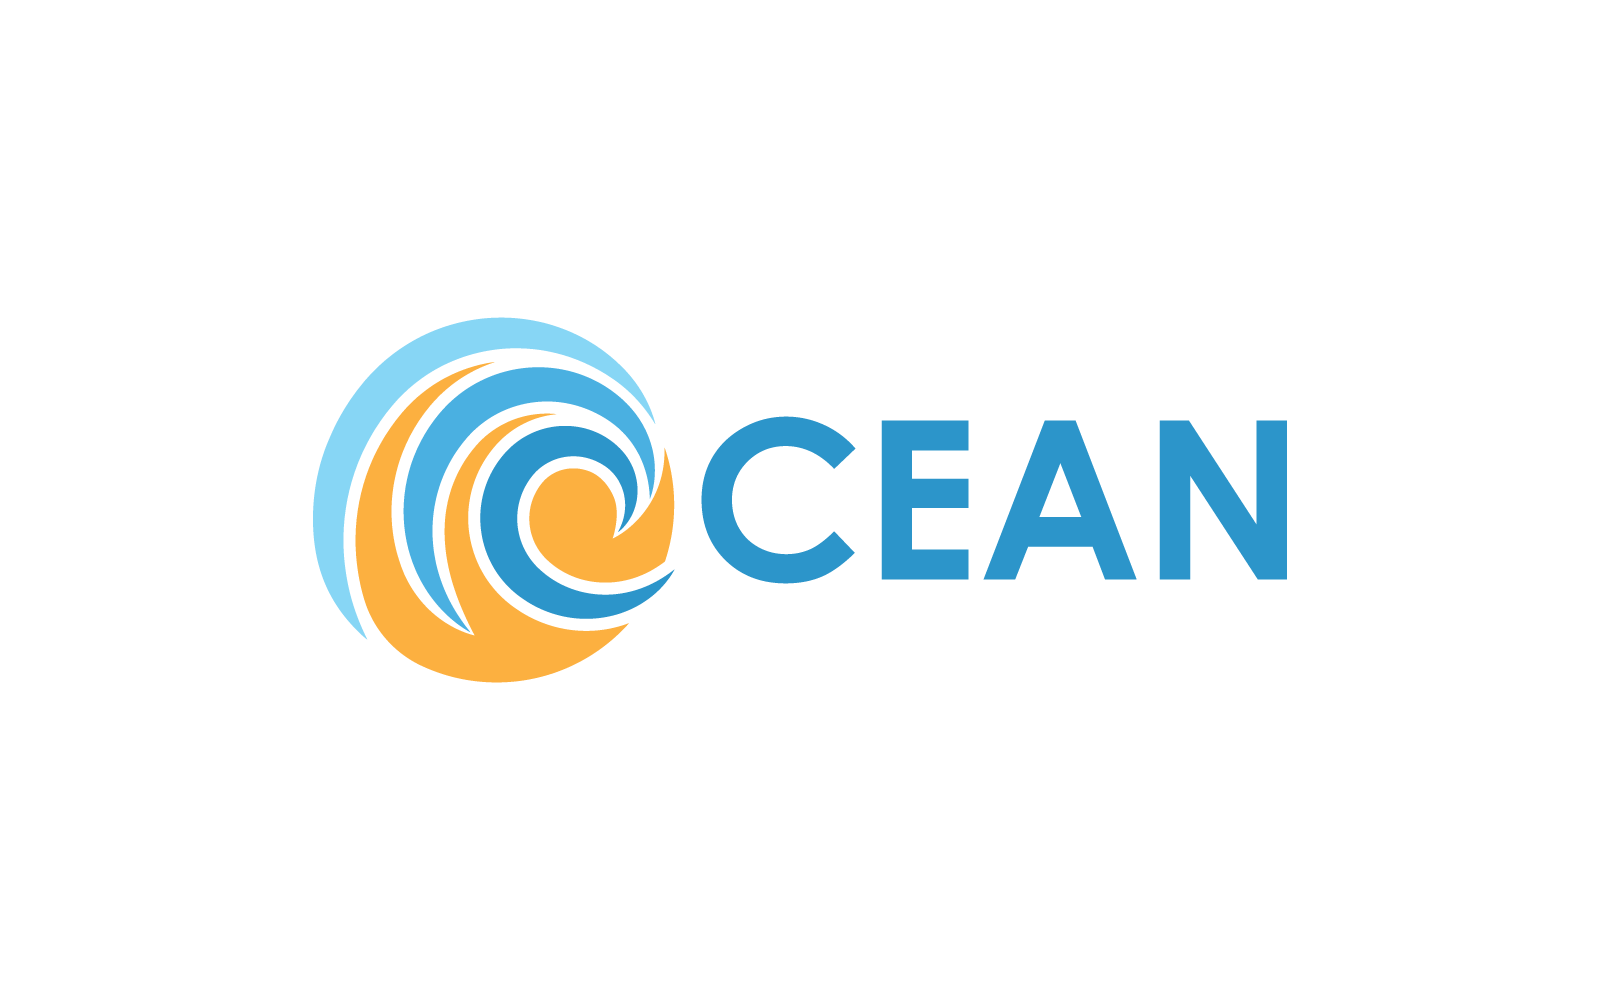 Abstract Wave ocean logo design for business template